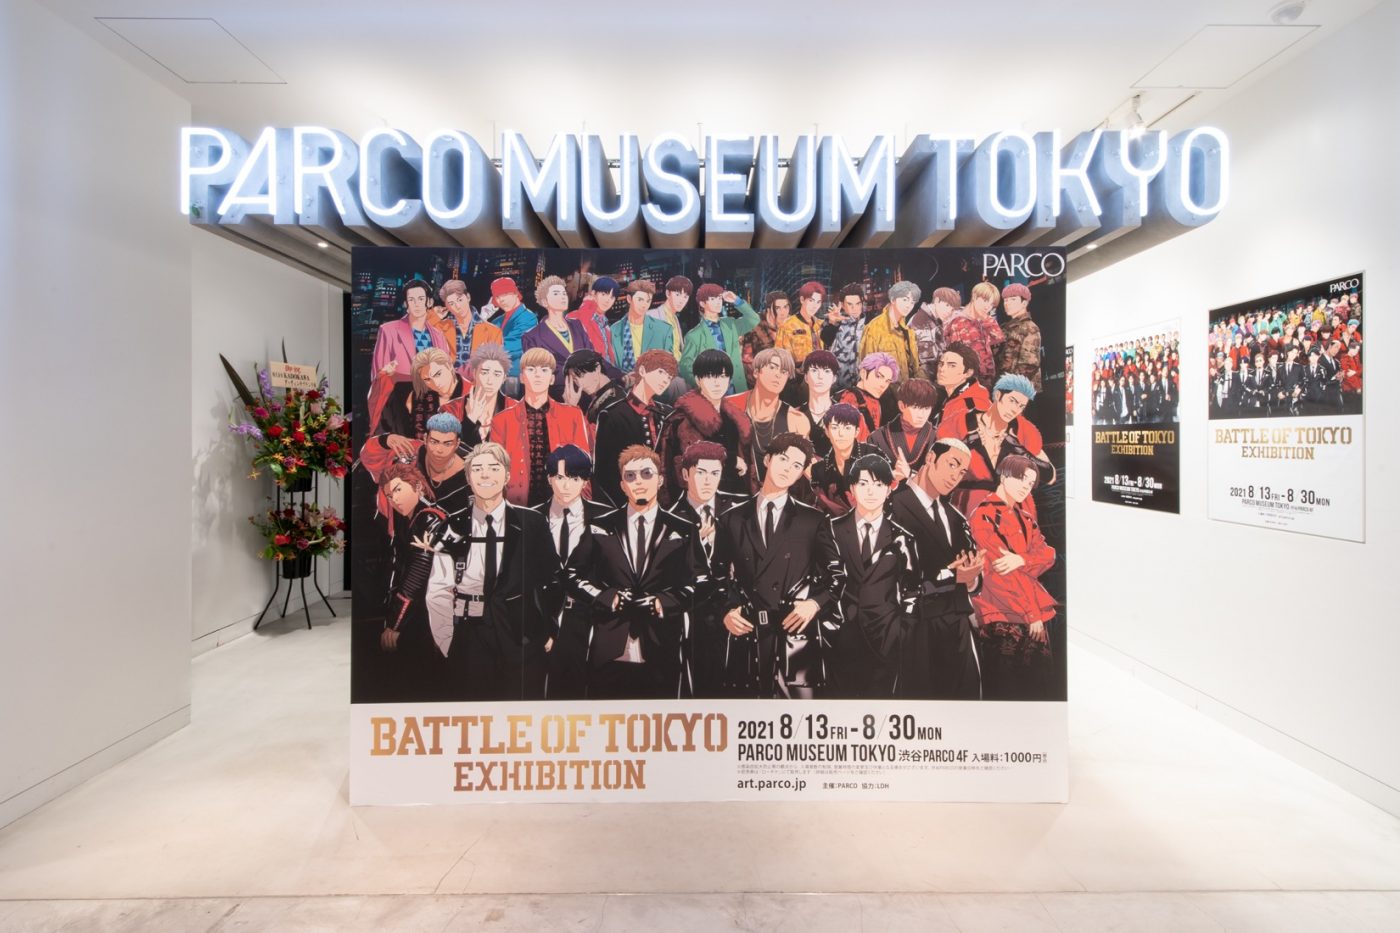 『BATTLE OF TOKYO EXHIBITION』渋谷PARCOにて開催スタート - 画像一覧（10/10）